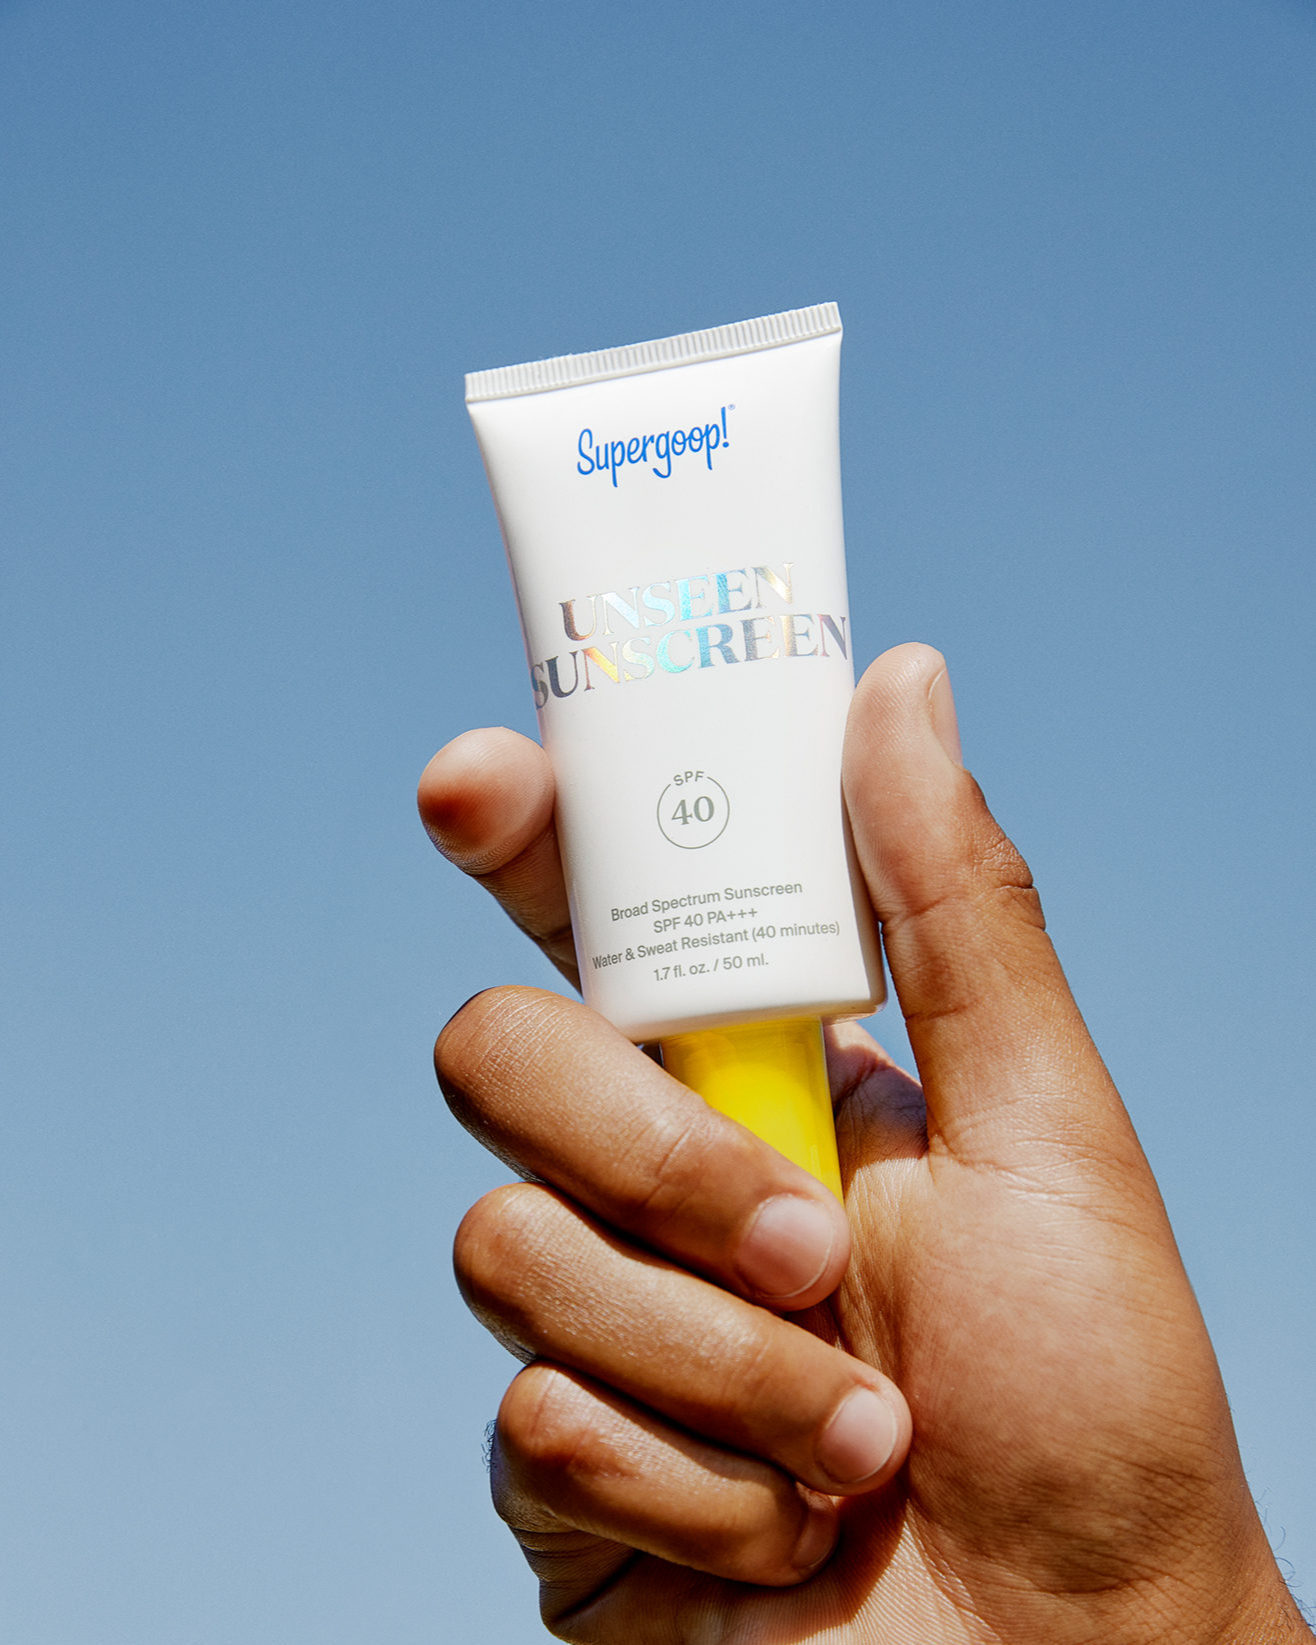 cerave hydrating tinted sunscreen